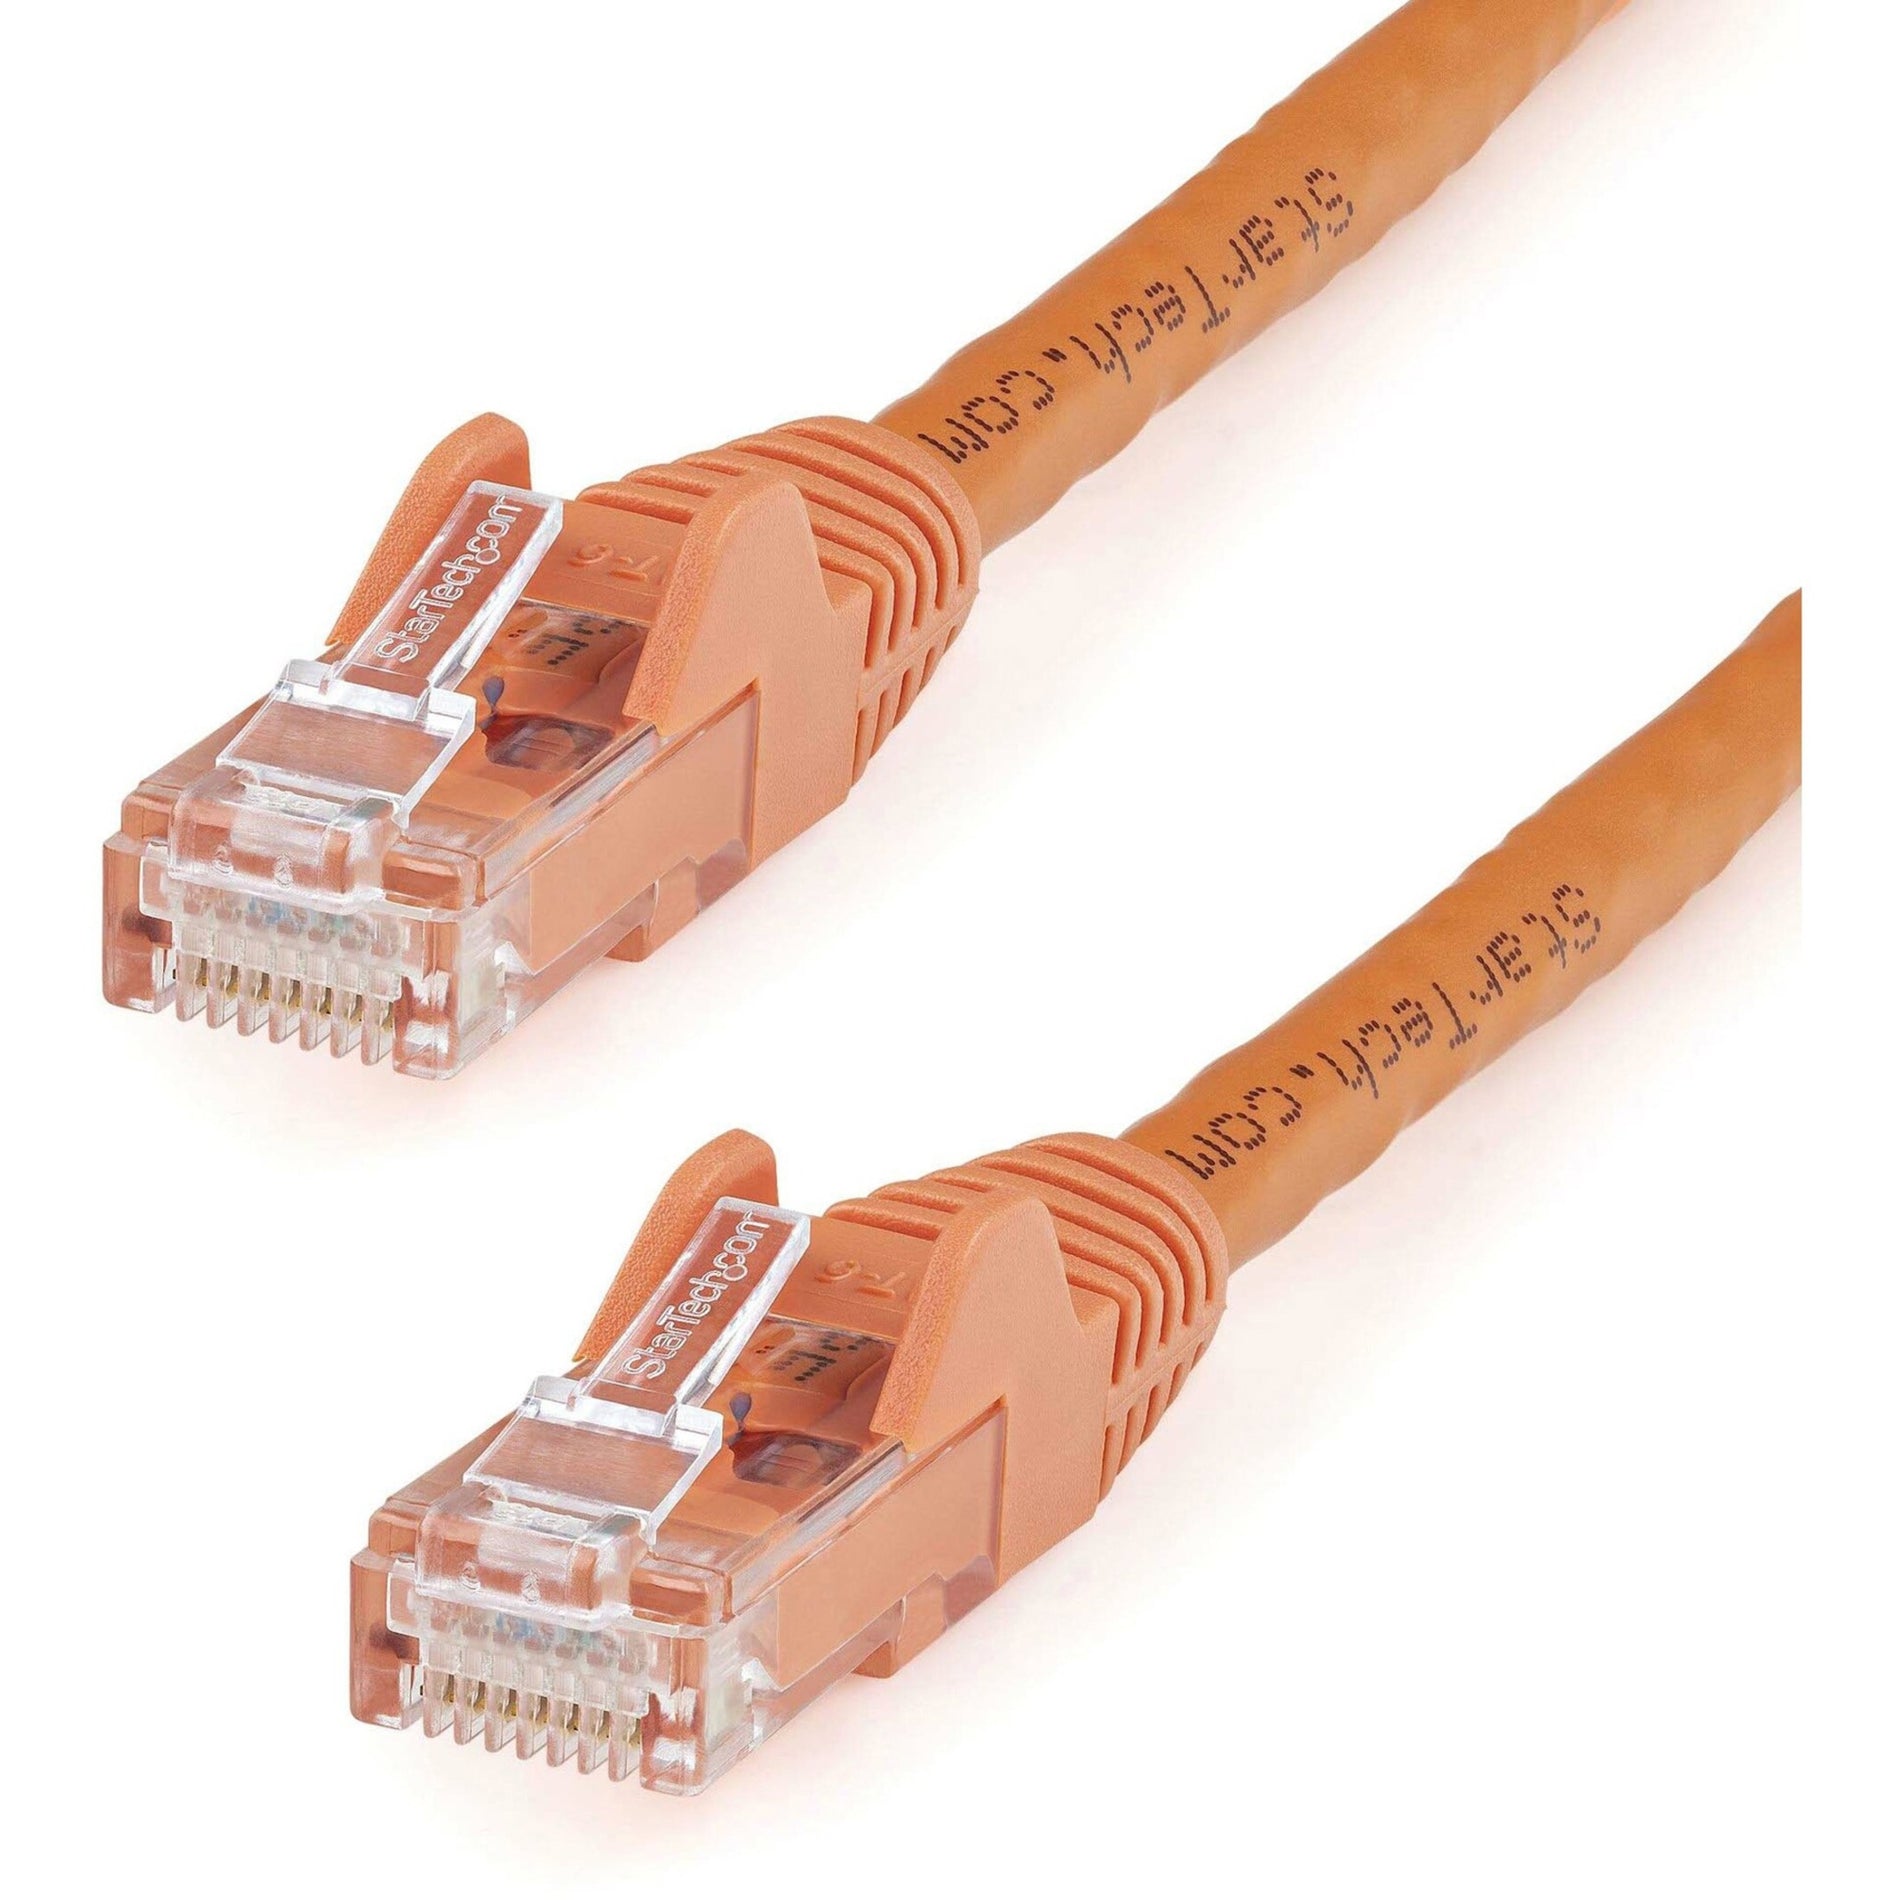 StarTech.com N6PATCH25OR 25 ft Orange Snagless Cat6 UTP Patch Cable, Lifetime Warranty, 10 Gbit/s Data Transfer Rate, RJ45 Connector